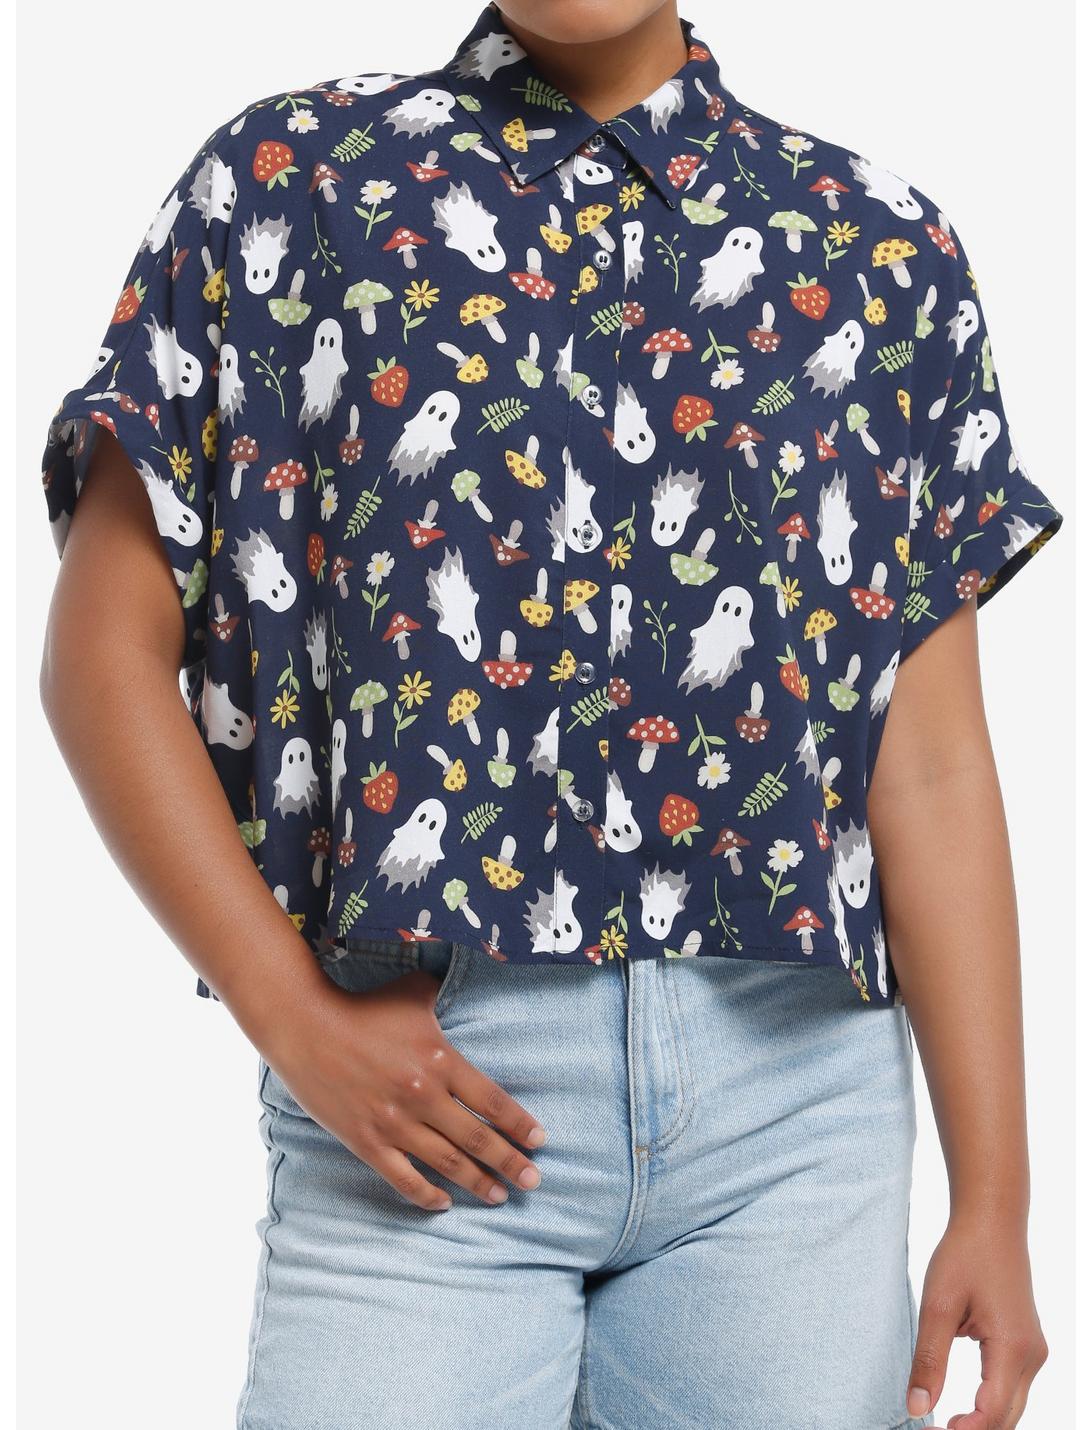 Thorn & Fable Mushroom Ghost Girls Boxy Woven Button-Up, , hi-res